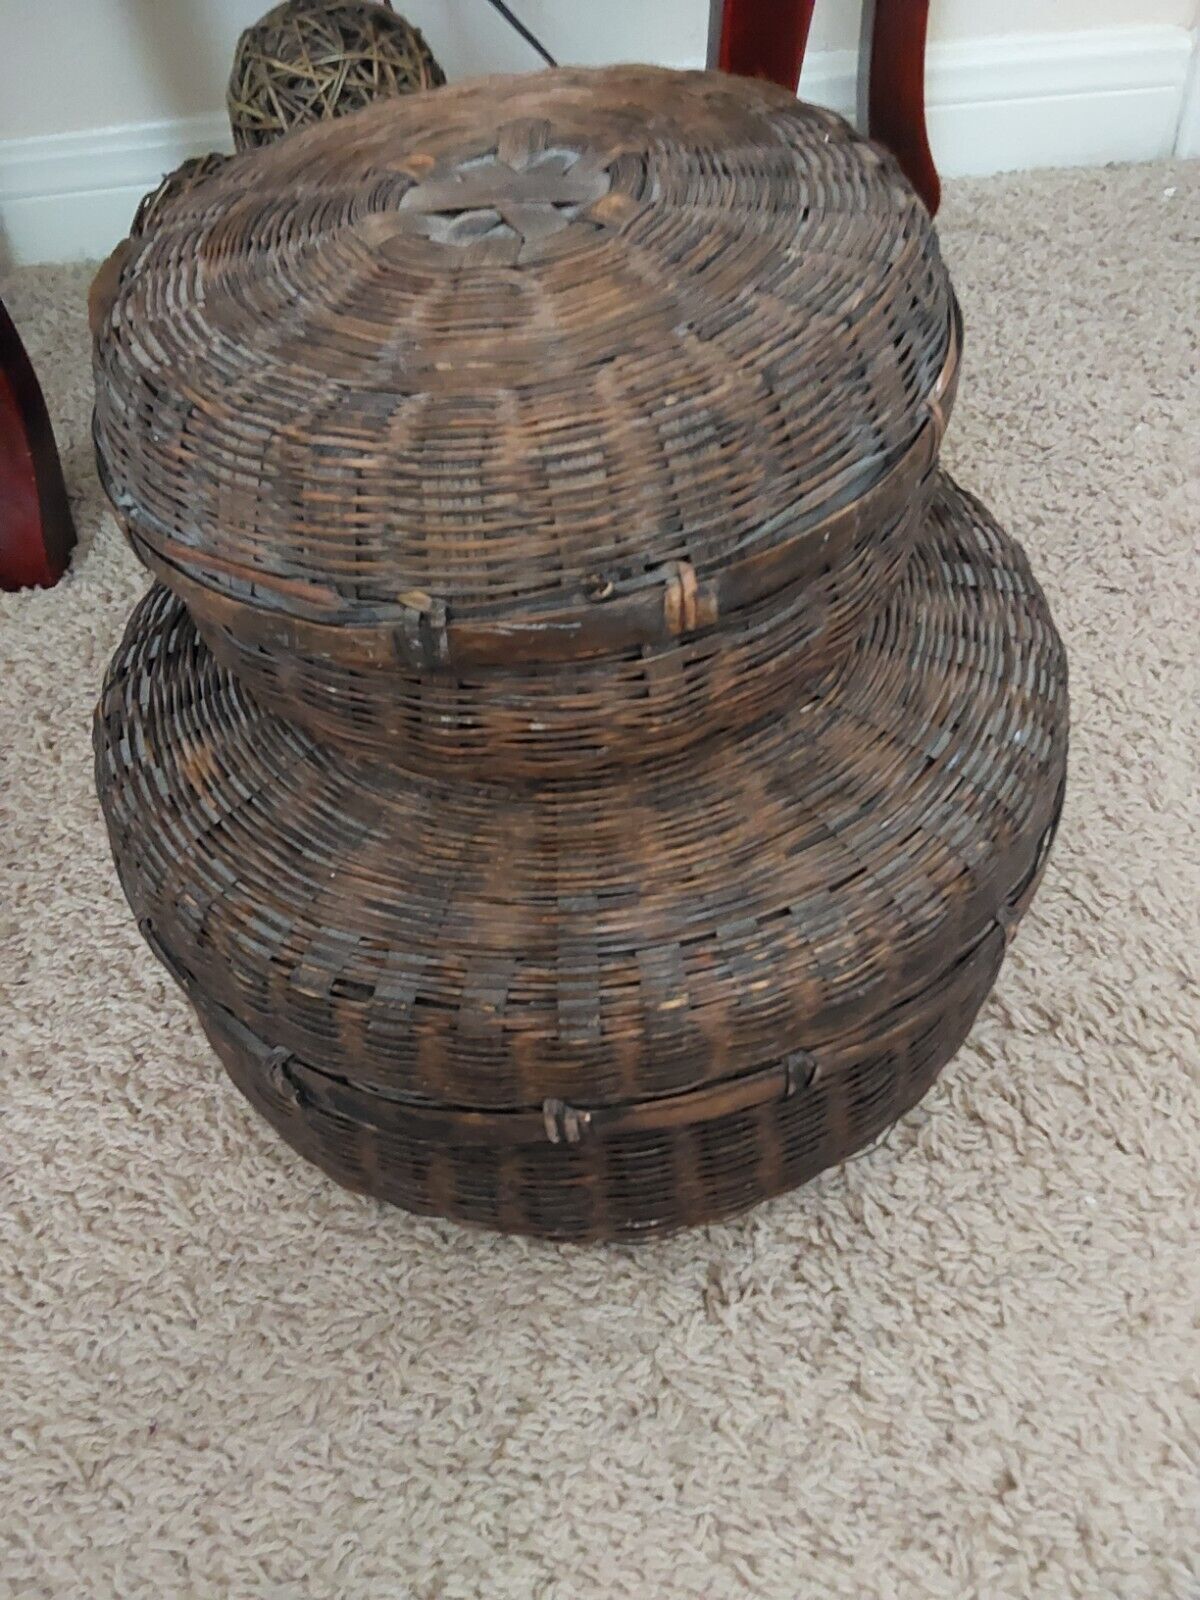 Rare Find Antique Chinese Sewing Baskets2 Vintage from the 1920s,great condition